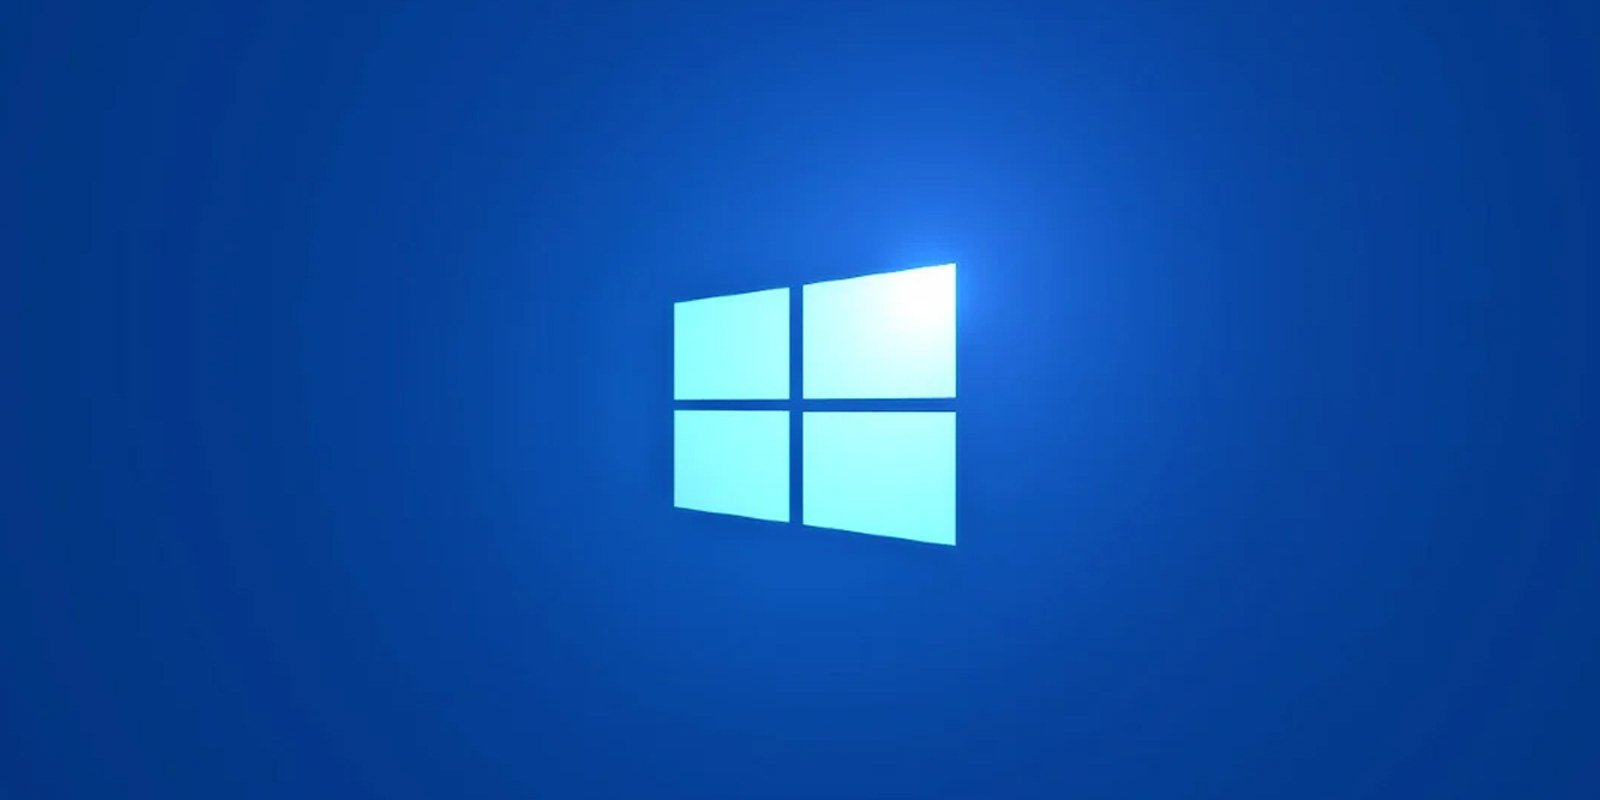 Can't download Windows 10 21H2? Here's how to get it